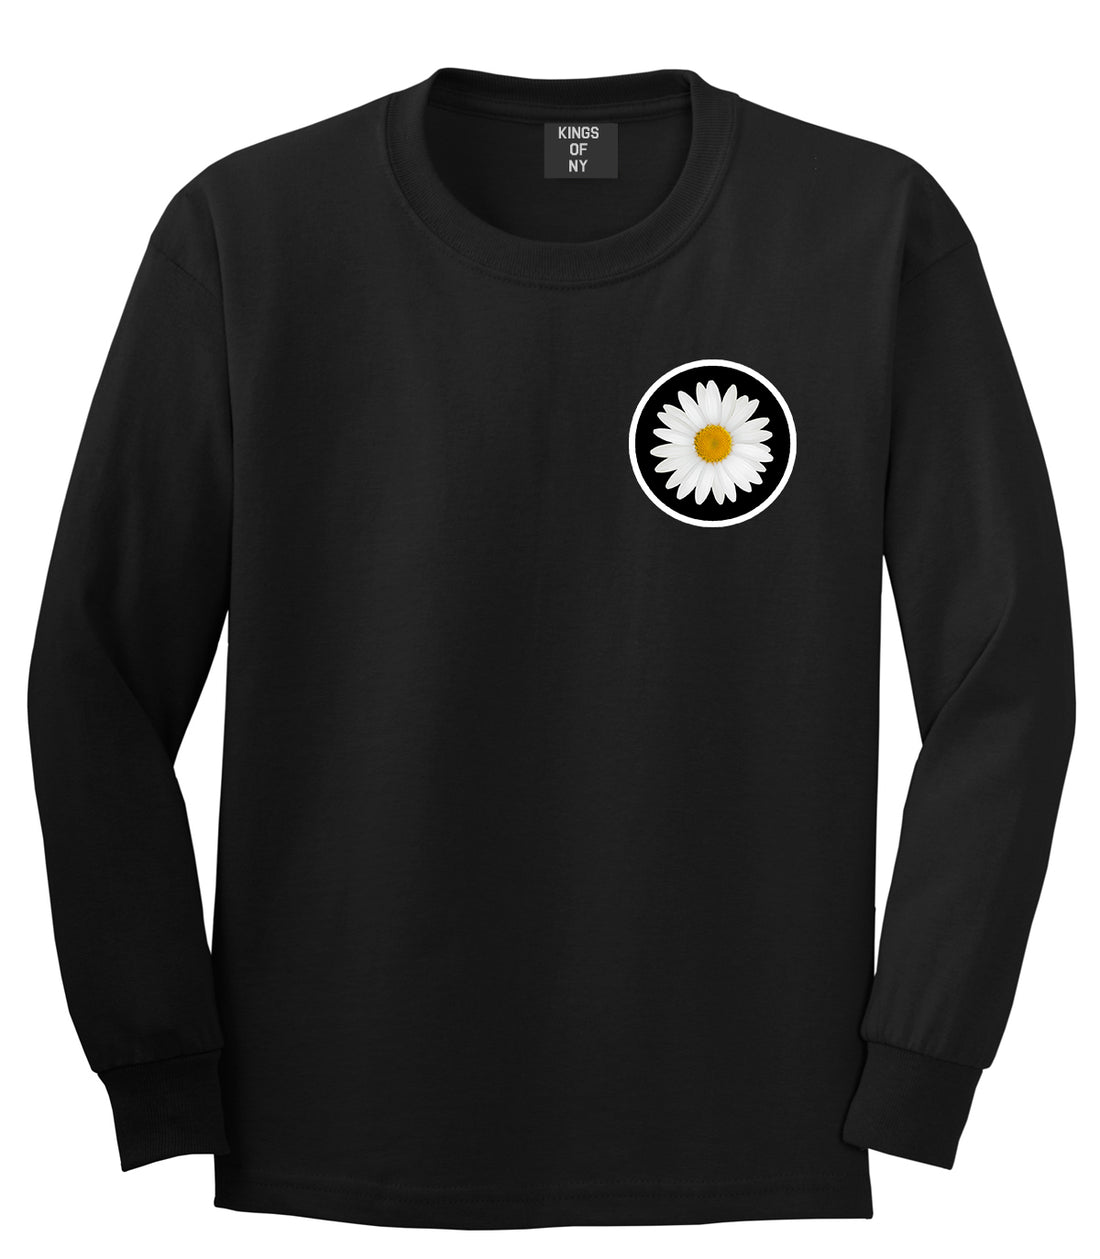 Daisy Flower Chest Mens Black Long Sleeve T-Shirt by Kings Of NY